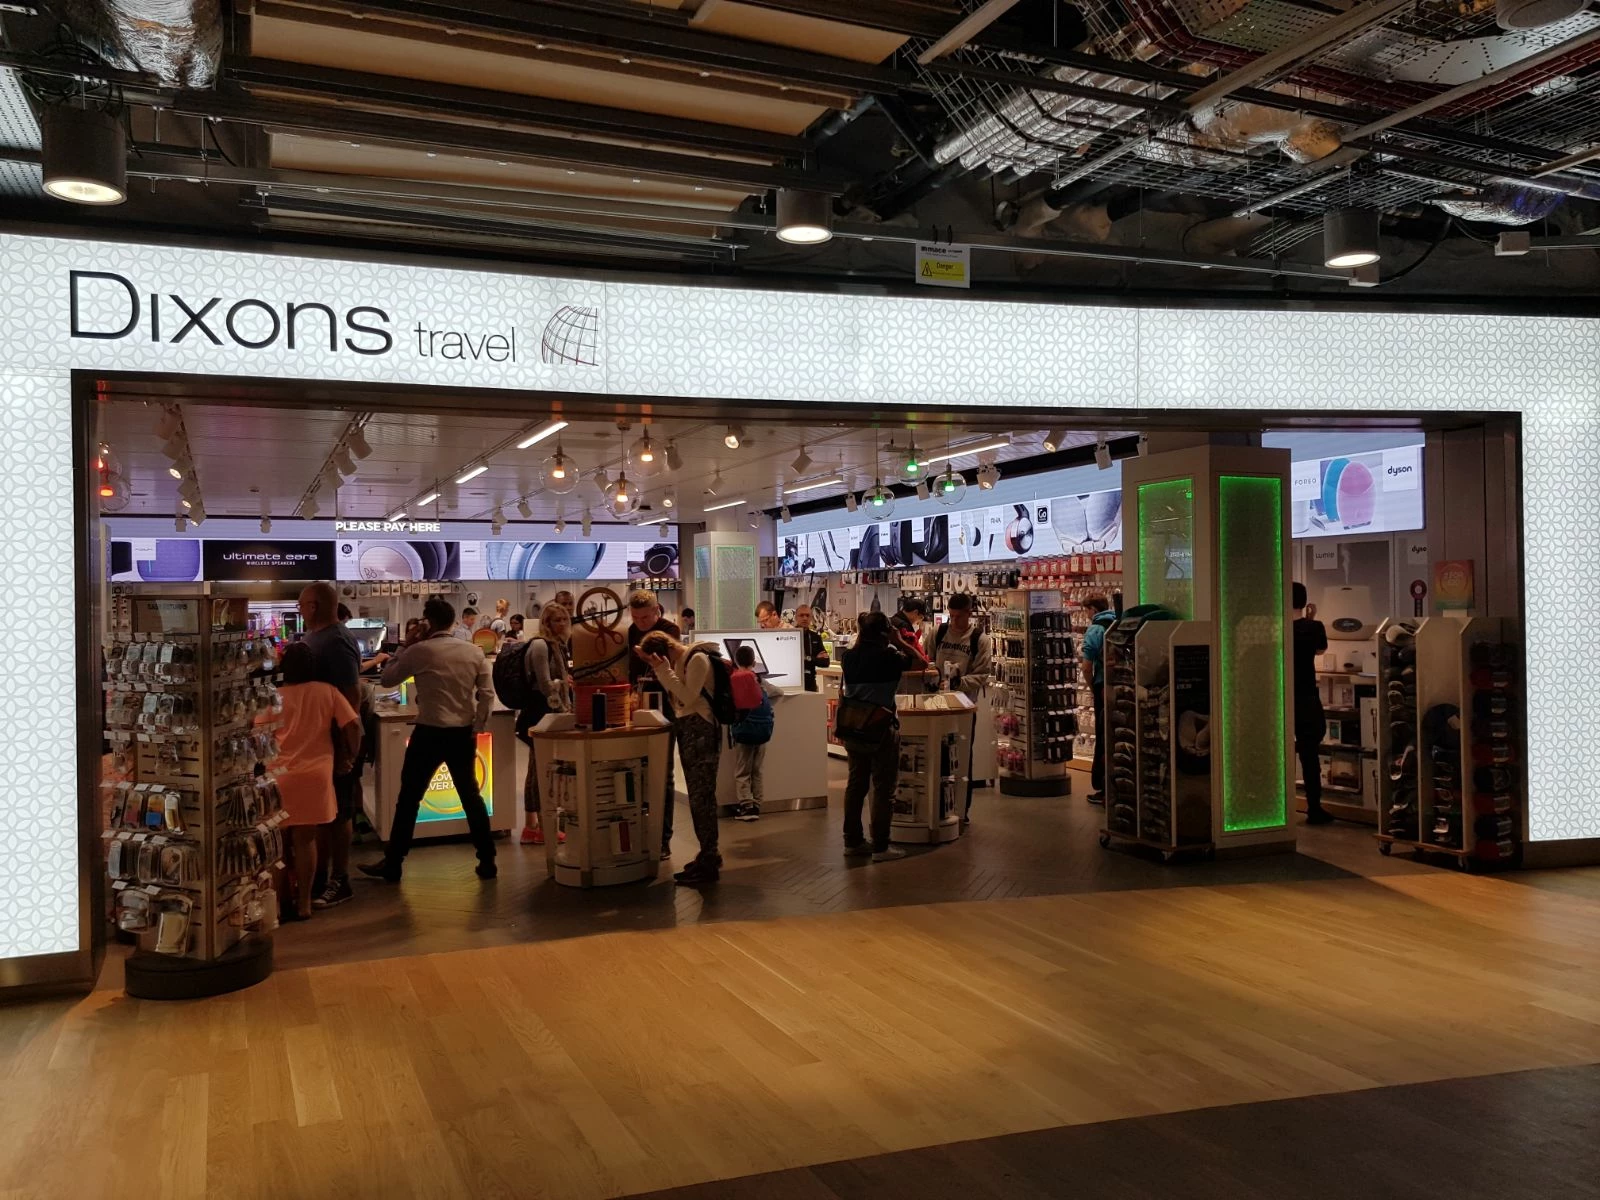 The new Dixons Travel store at Heathrow.